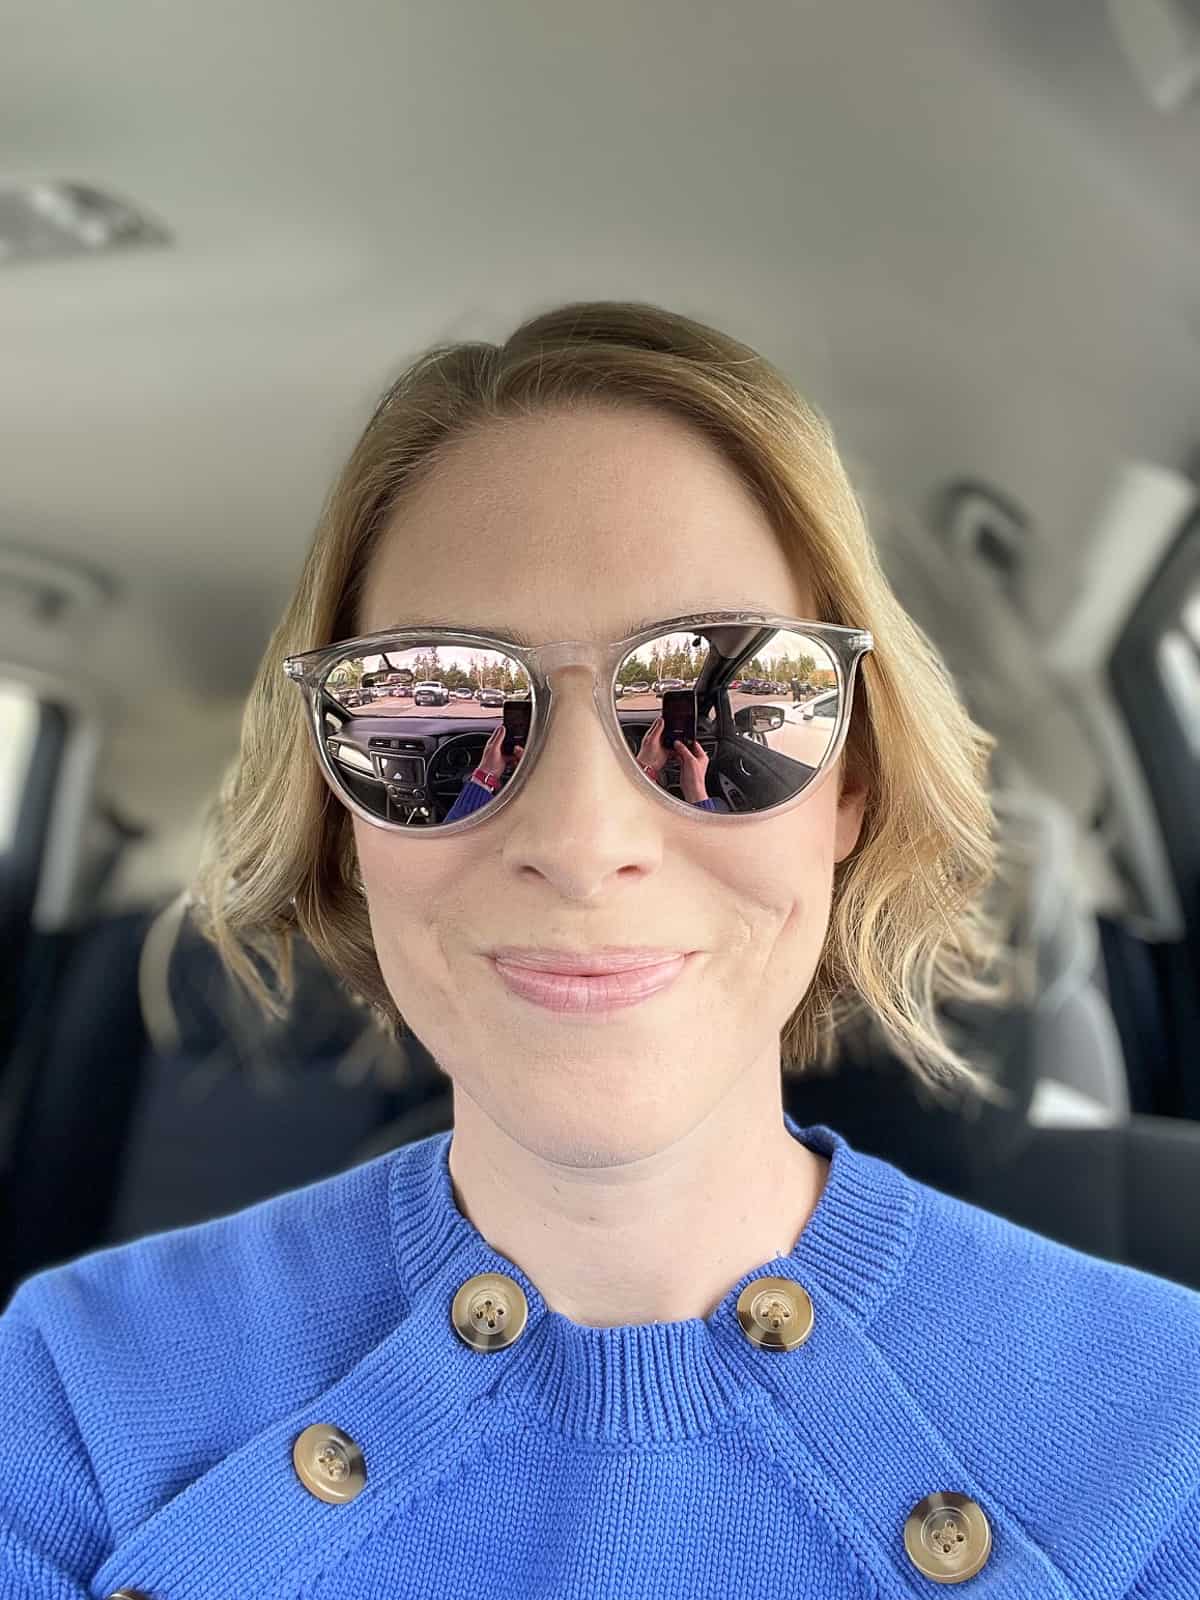 a woman in a blue sweater wearing sunglasses